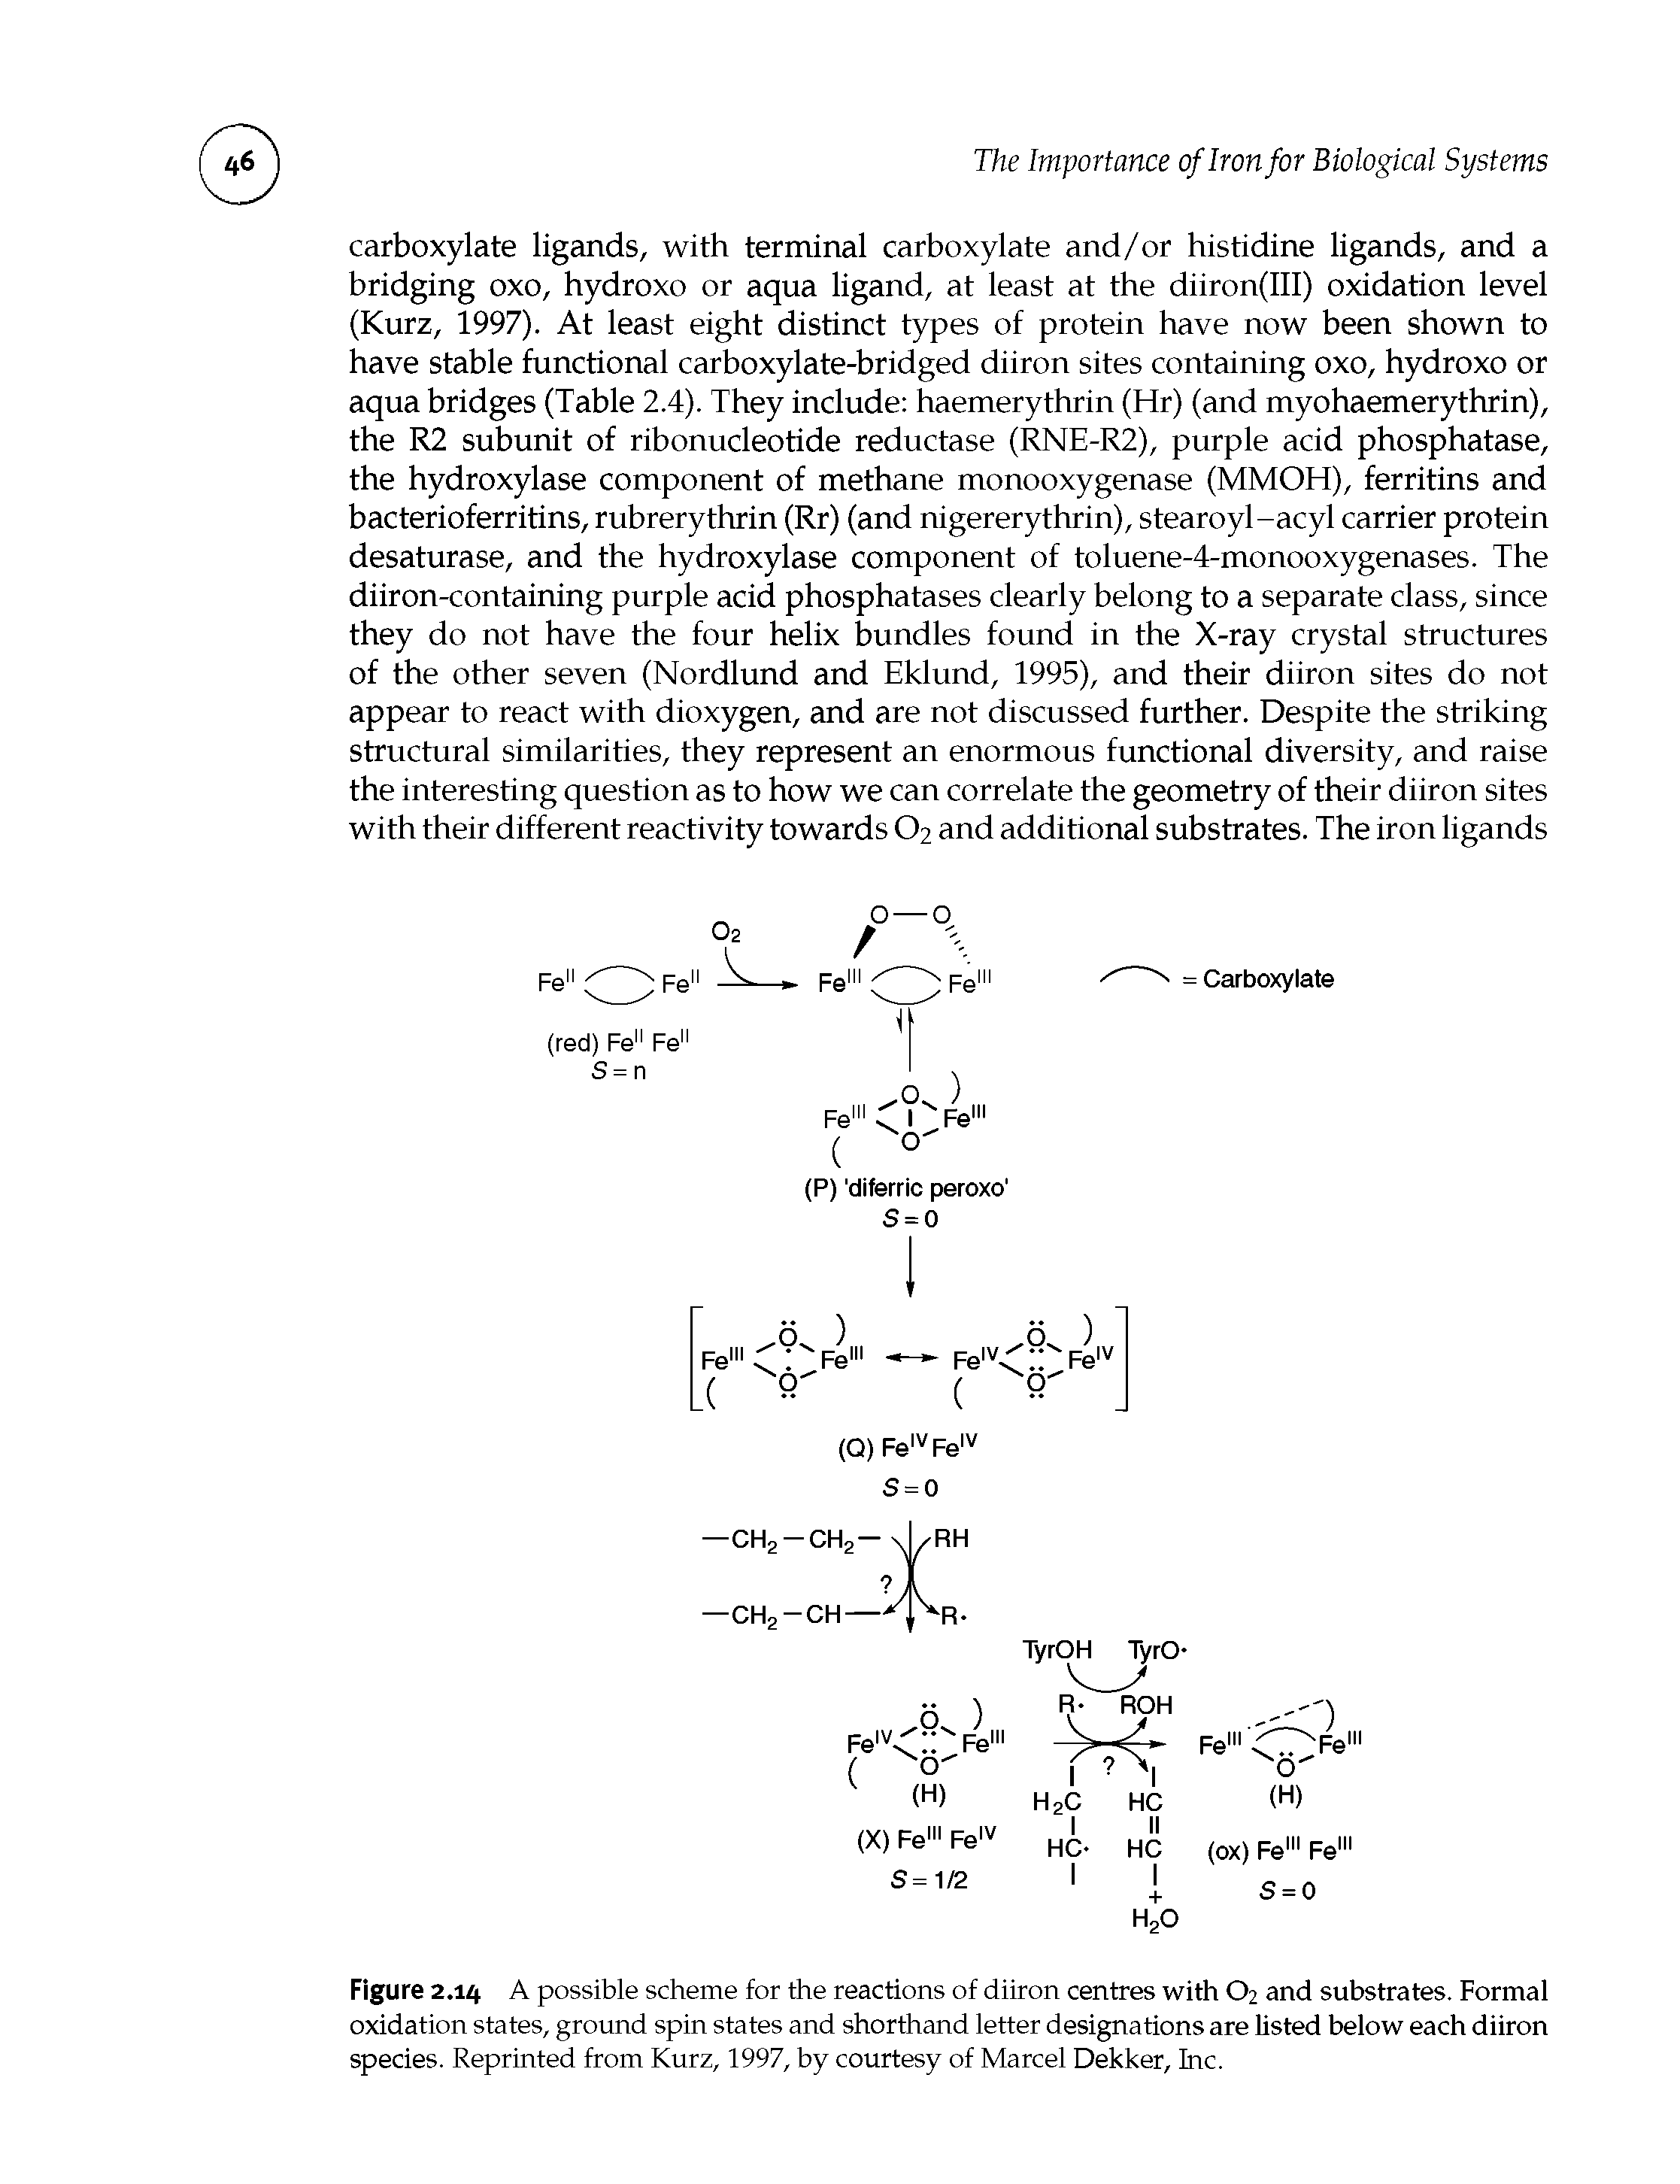 Figure 2.14 A possible scheme for the reactions of diiron centres with O2 and substrates. Formal oxidation states, ground spin states and shorthand letter designations are listed below each diiron species. Reprinted from Kurz, 1997, by courtesy of Marcel Dekker, Inc.